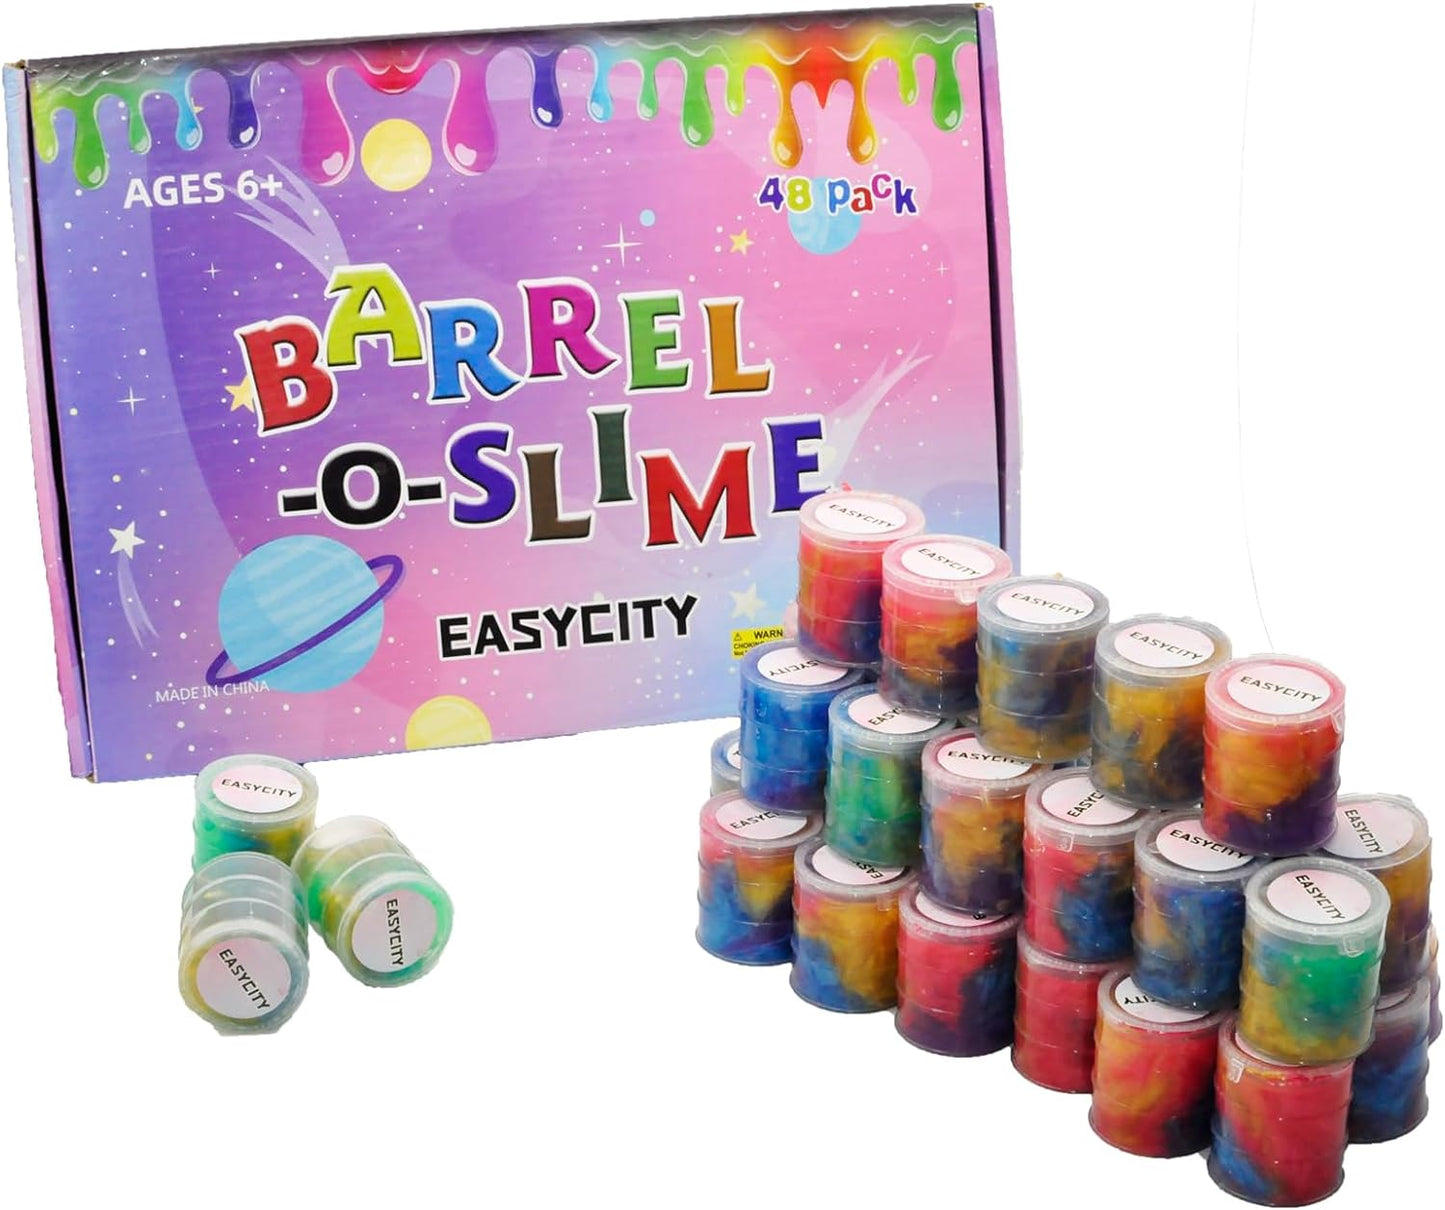 Marbled Starry Slime, 24 Pack Colorful Sludgy Gooey Fidget Kit for Sensory and Tactile Stimulation, Stress Relief, Prize, Party Favor, Educational Game - Kids, Boys, Girls